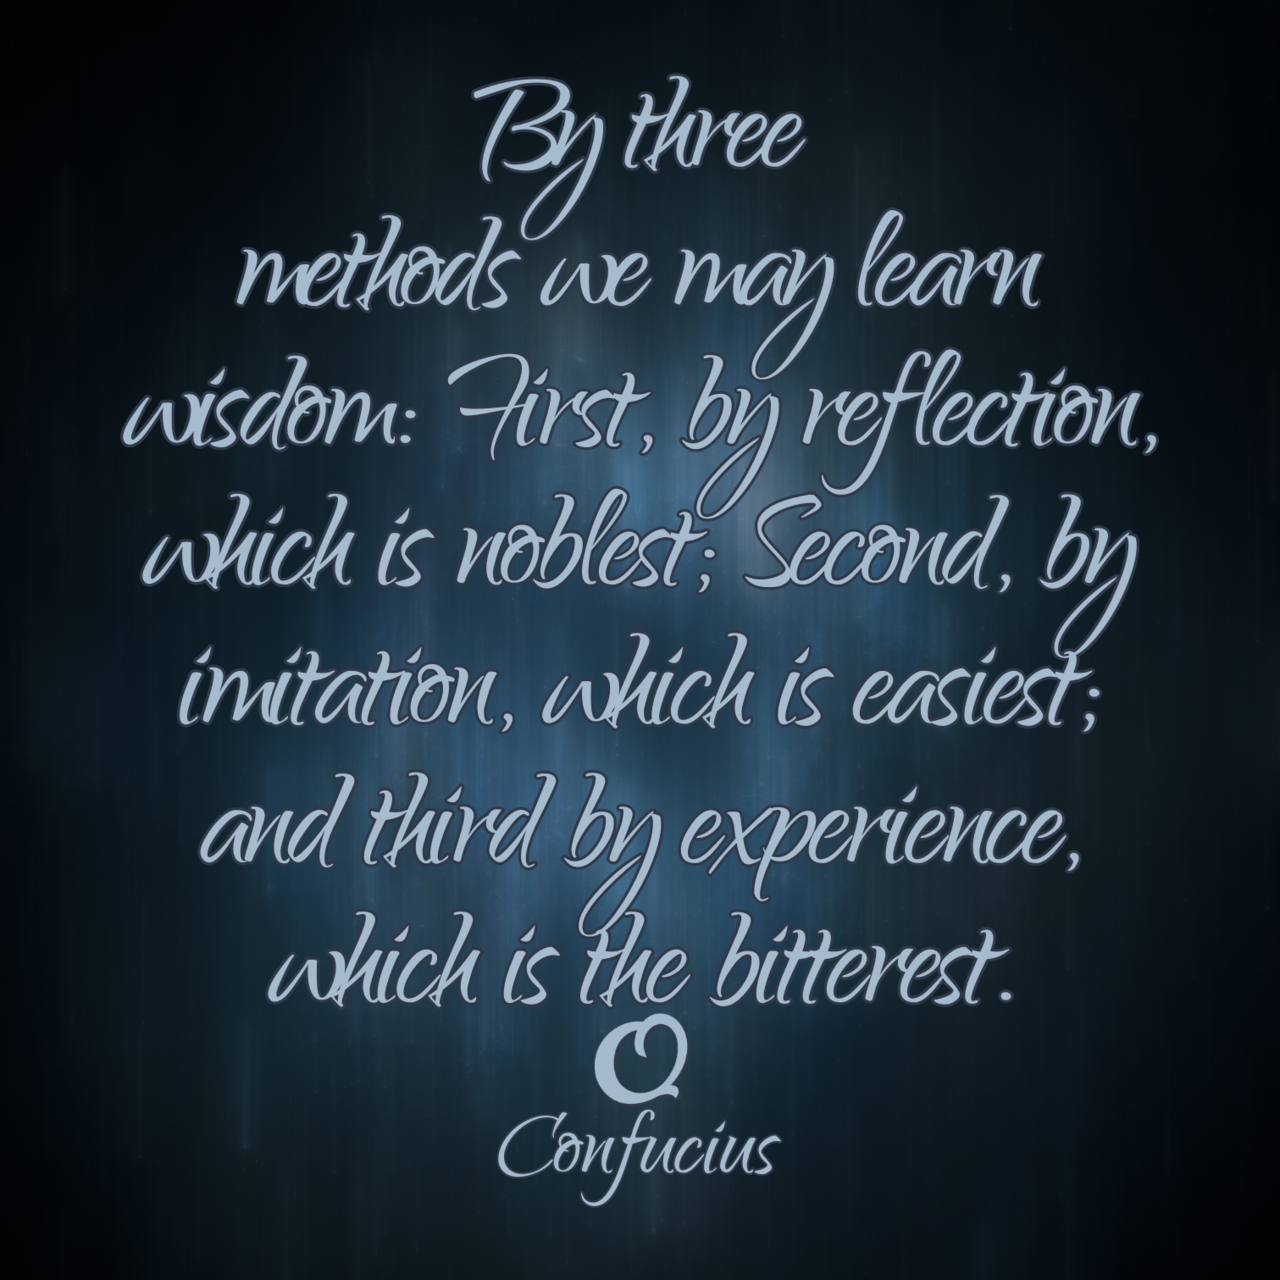 Confucius “By three methods we may learn wisdom: First, by reflection, which is noblest; Second, by imitation, which is easiest; and third by experience, which is the bitterest.”